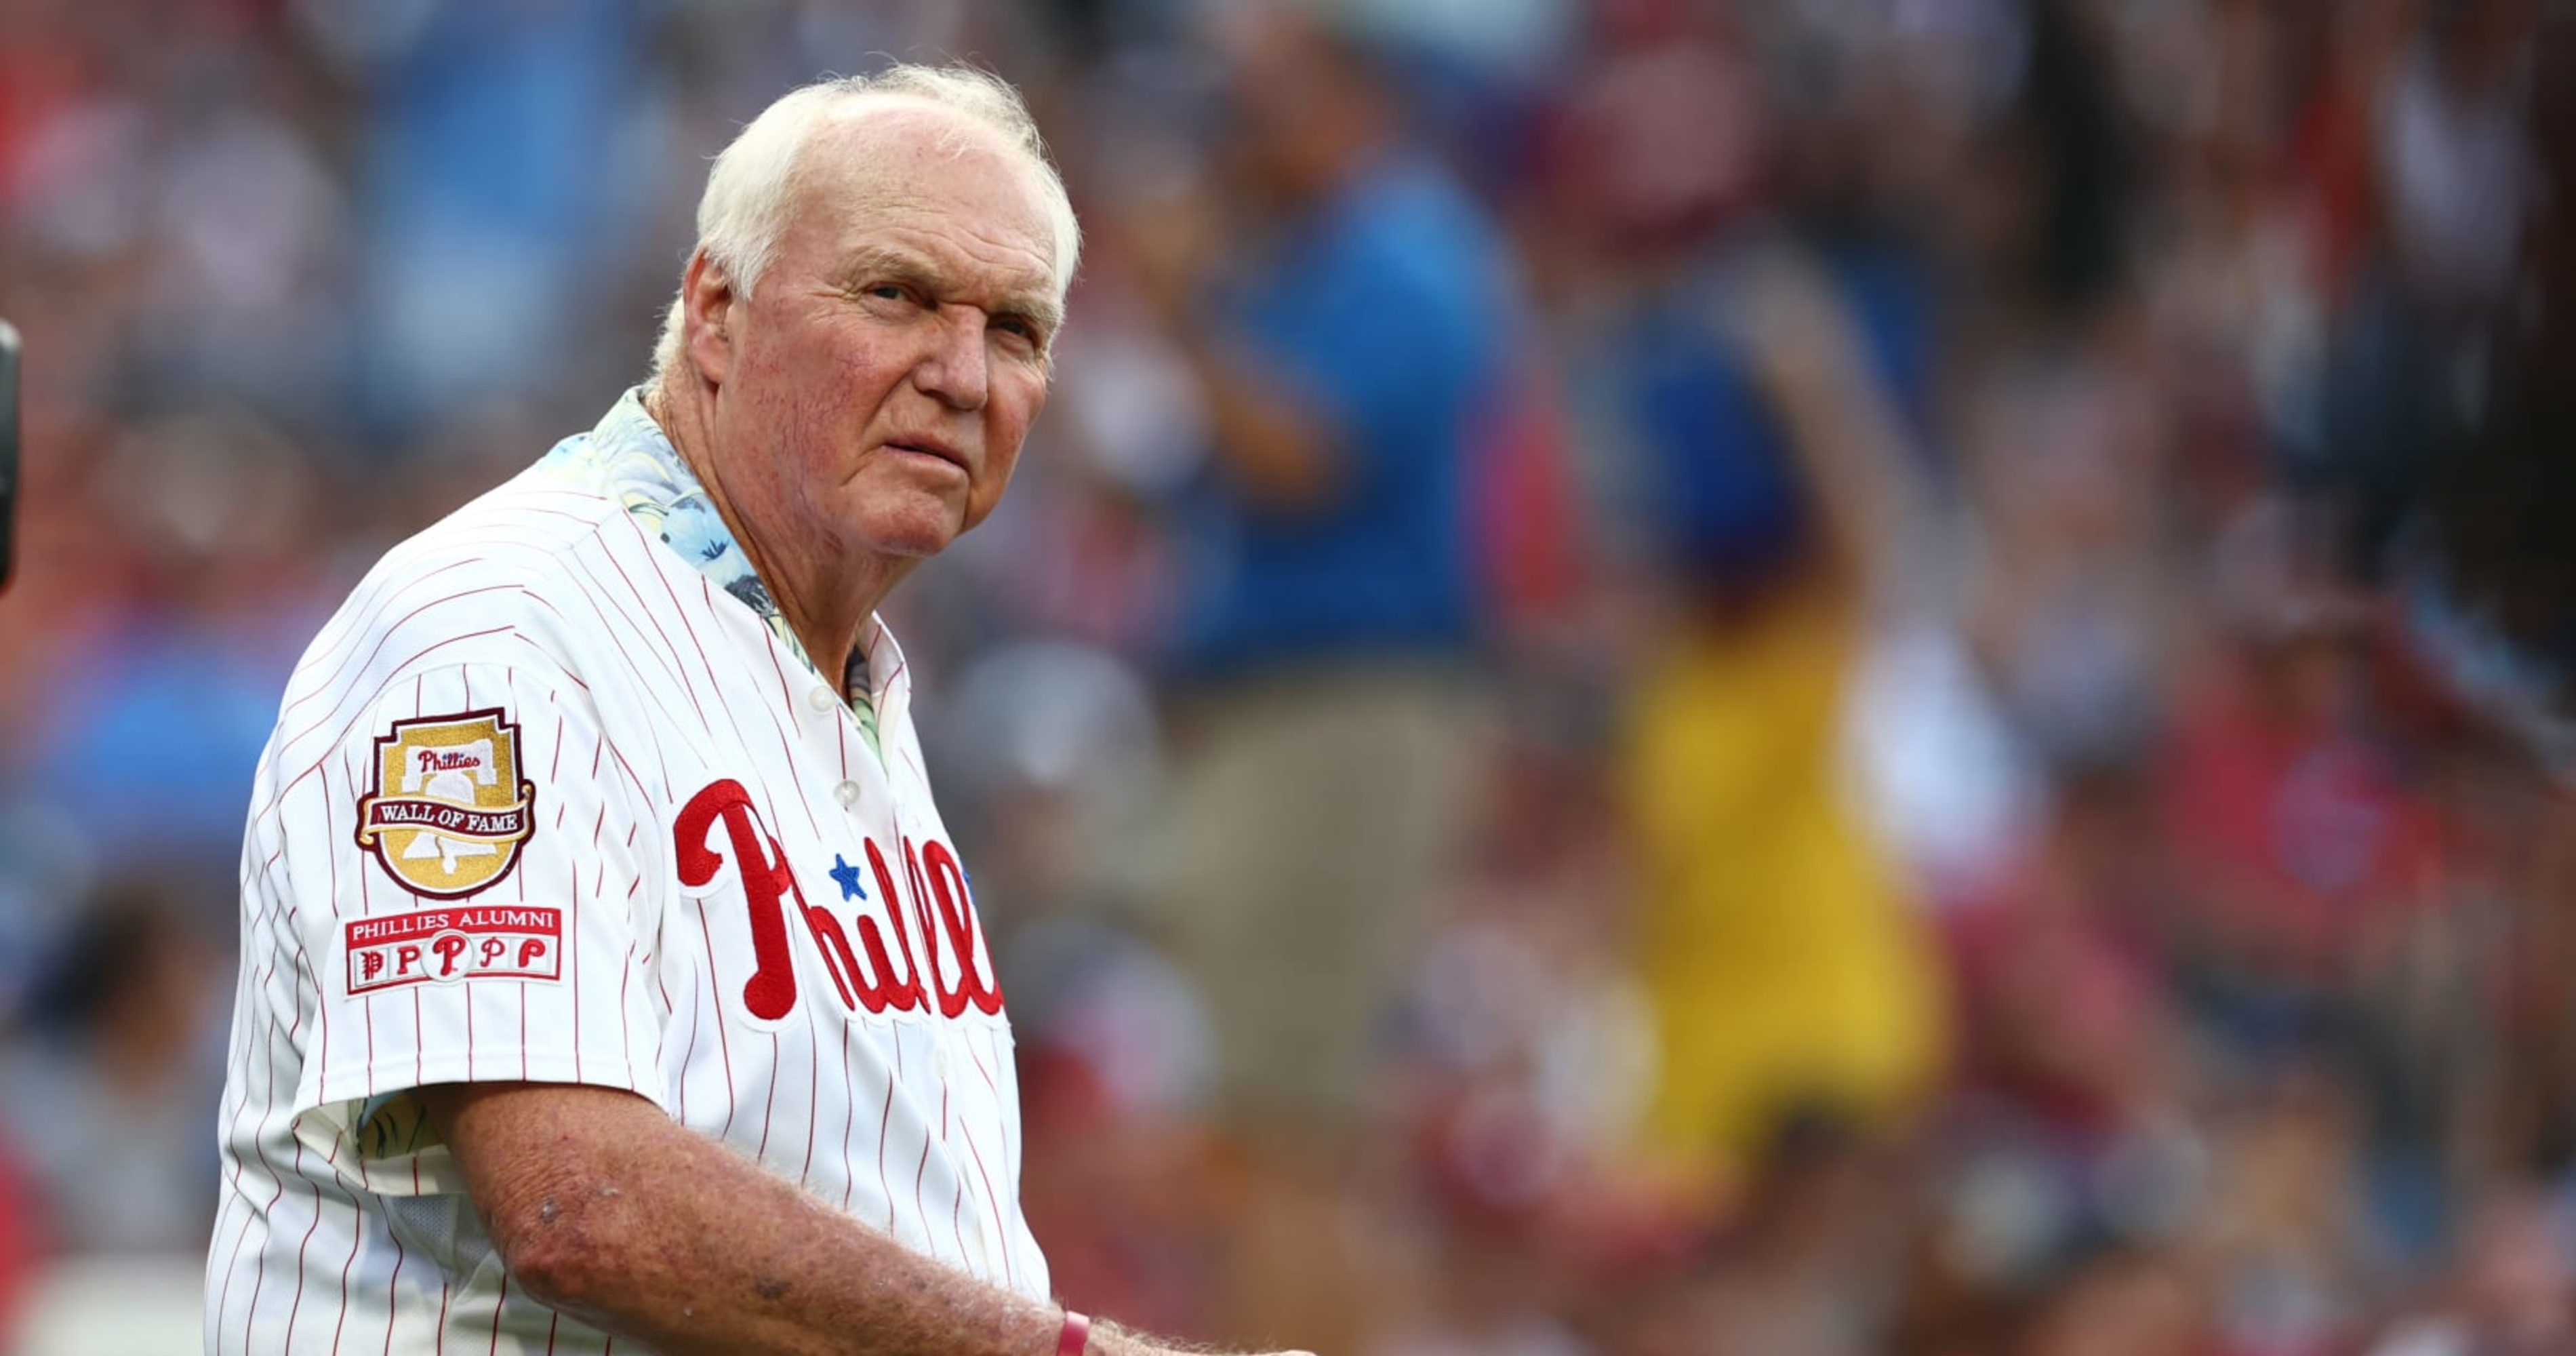 Charlie Manuel, who managed Phillies to World Series title, makes progress  after suffering stroke